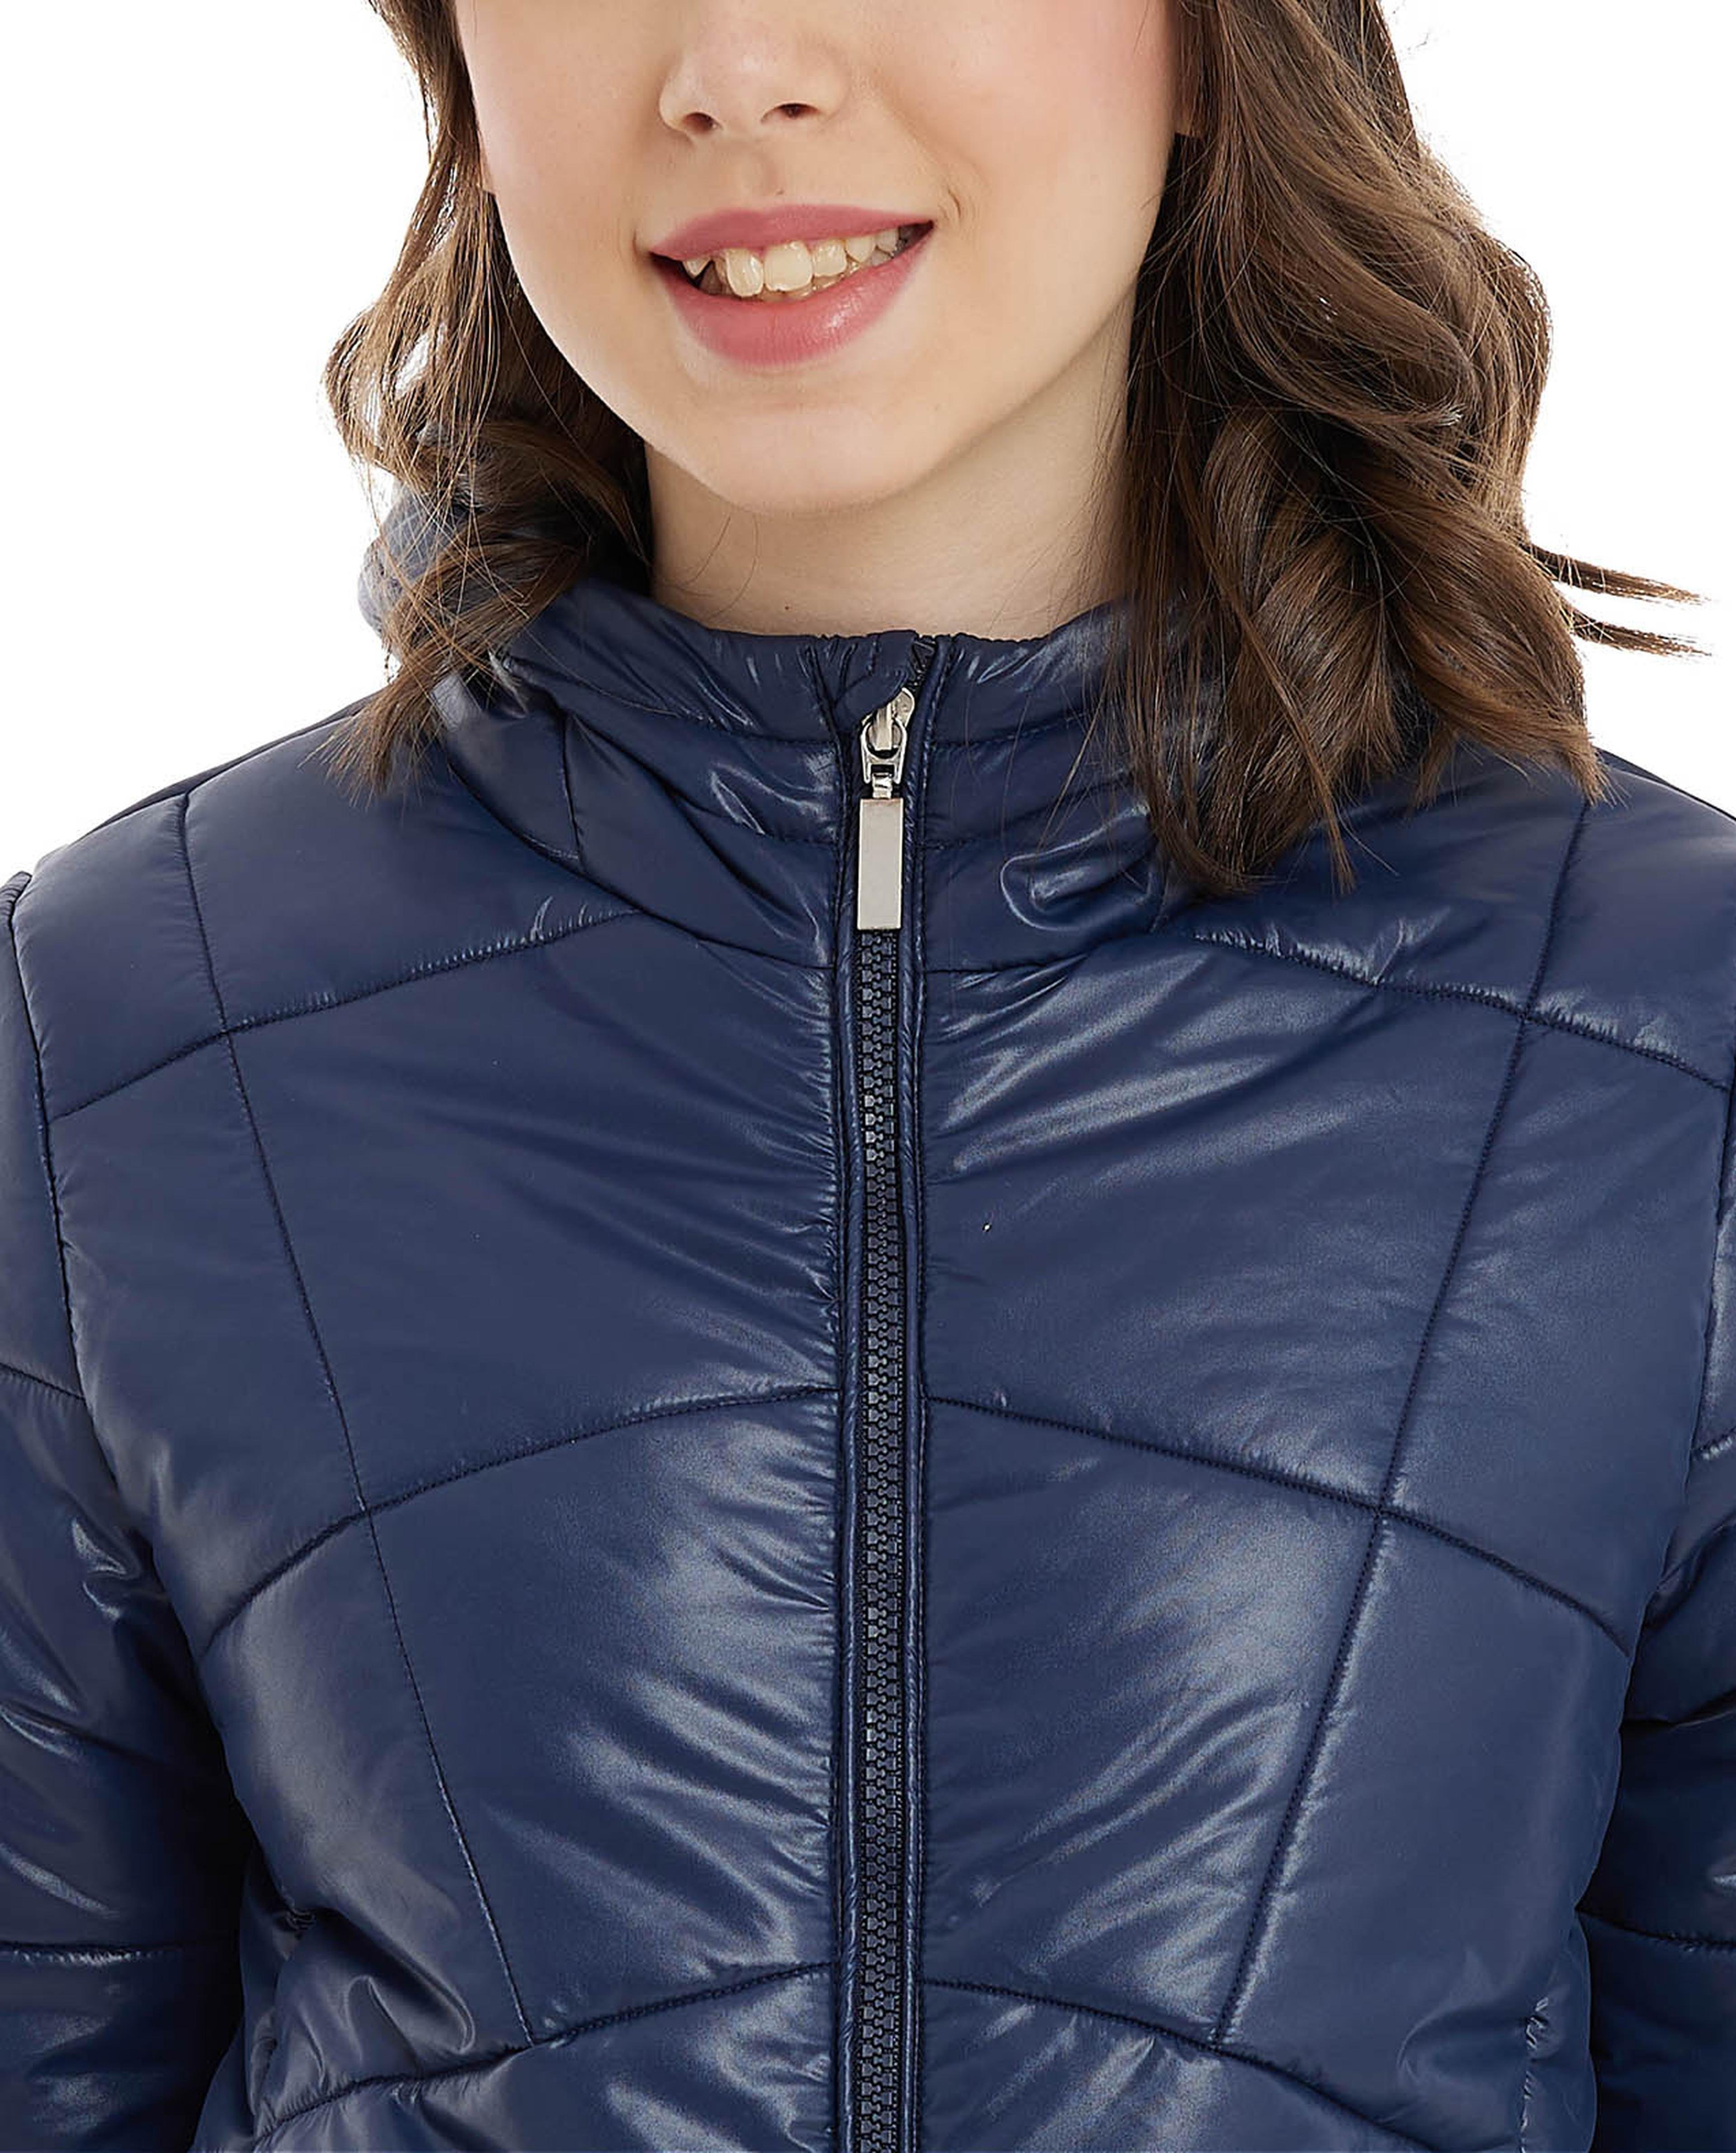 Quilted Puffer Jacket with Zipper Closure